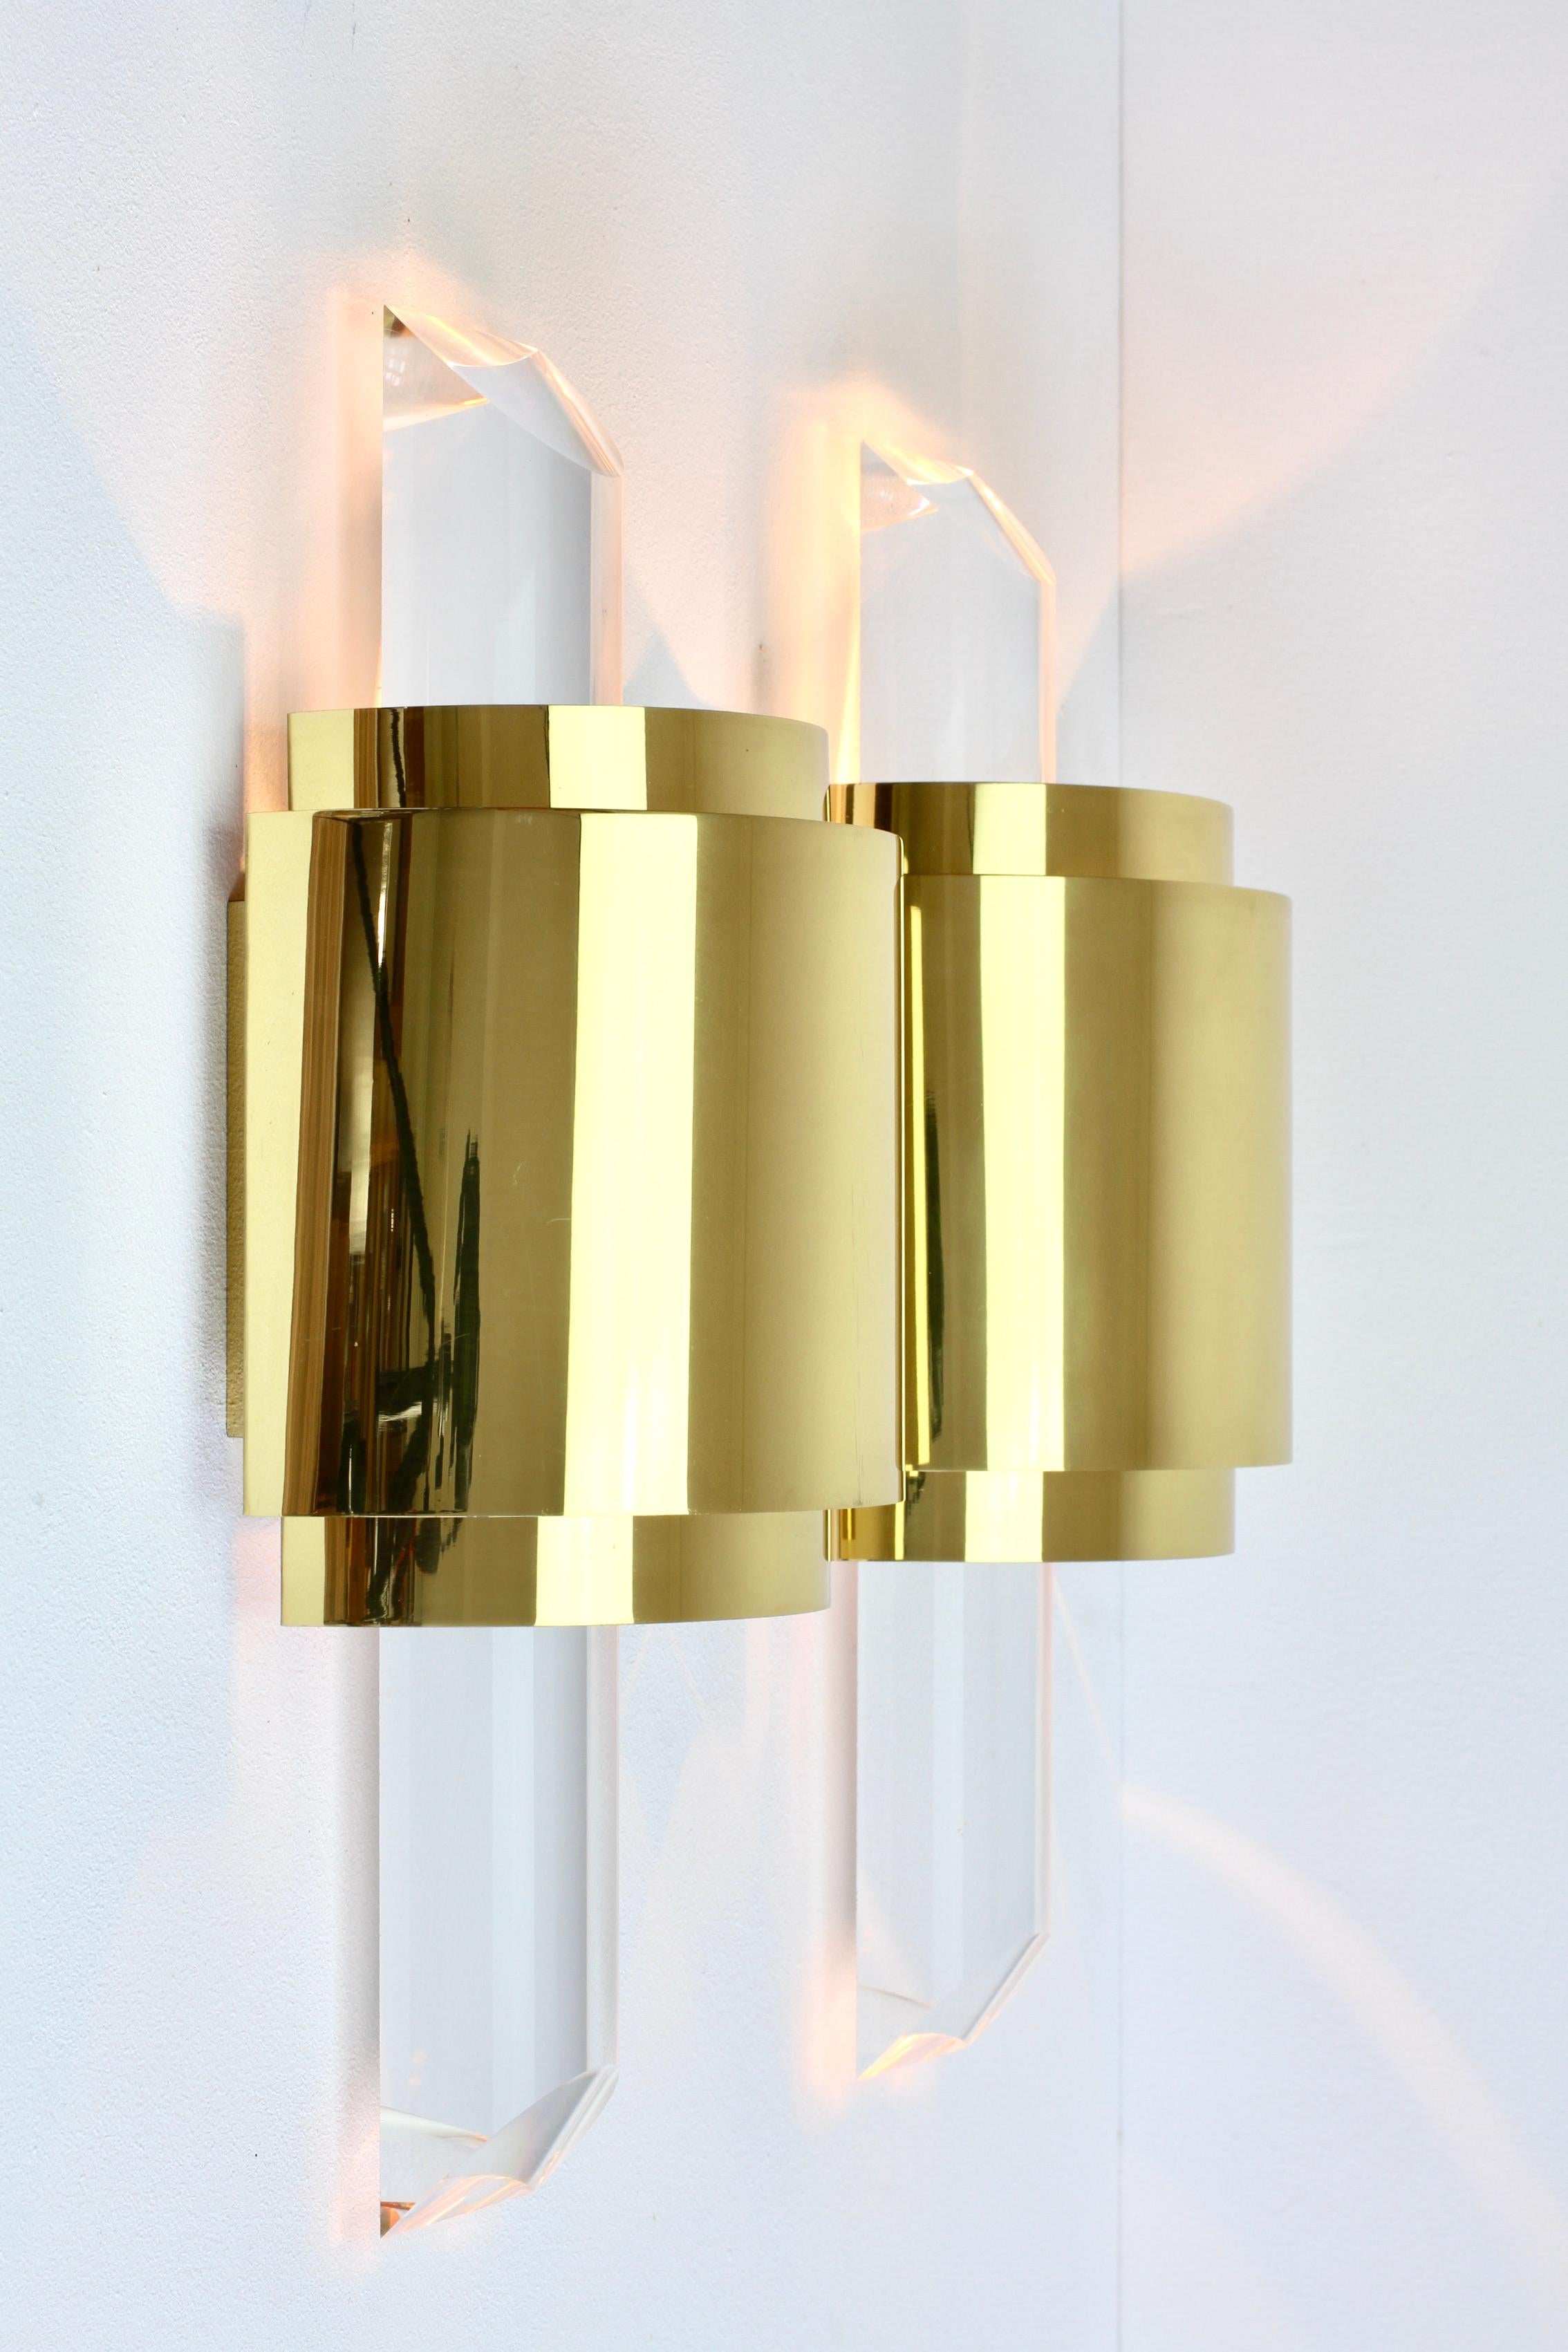 Large Hollywood Regency Lucite and Brass Wall Lights or Sconces, circa 1970s For Sale 7